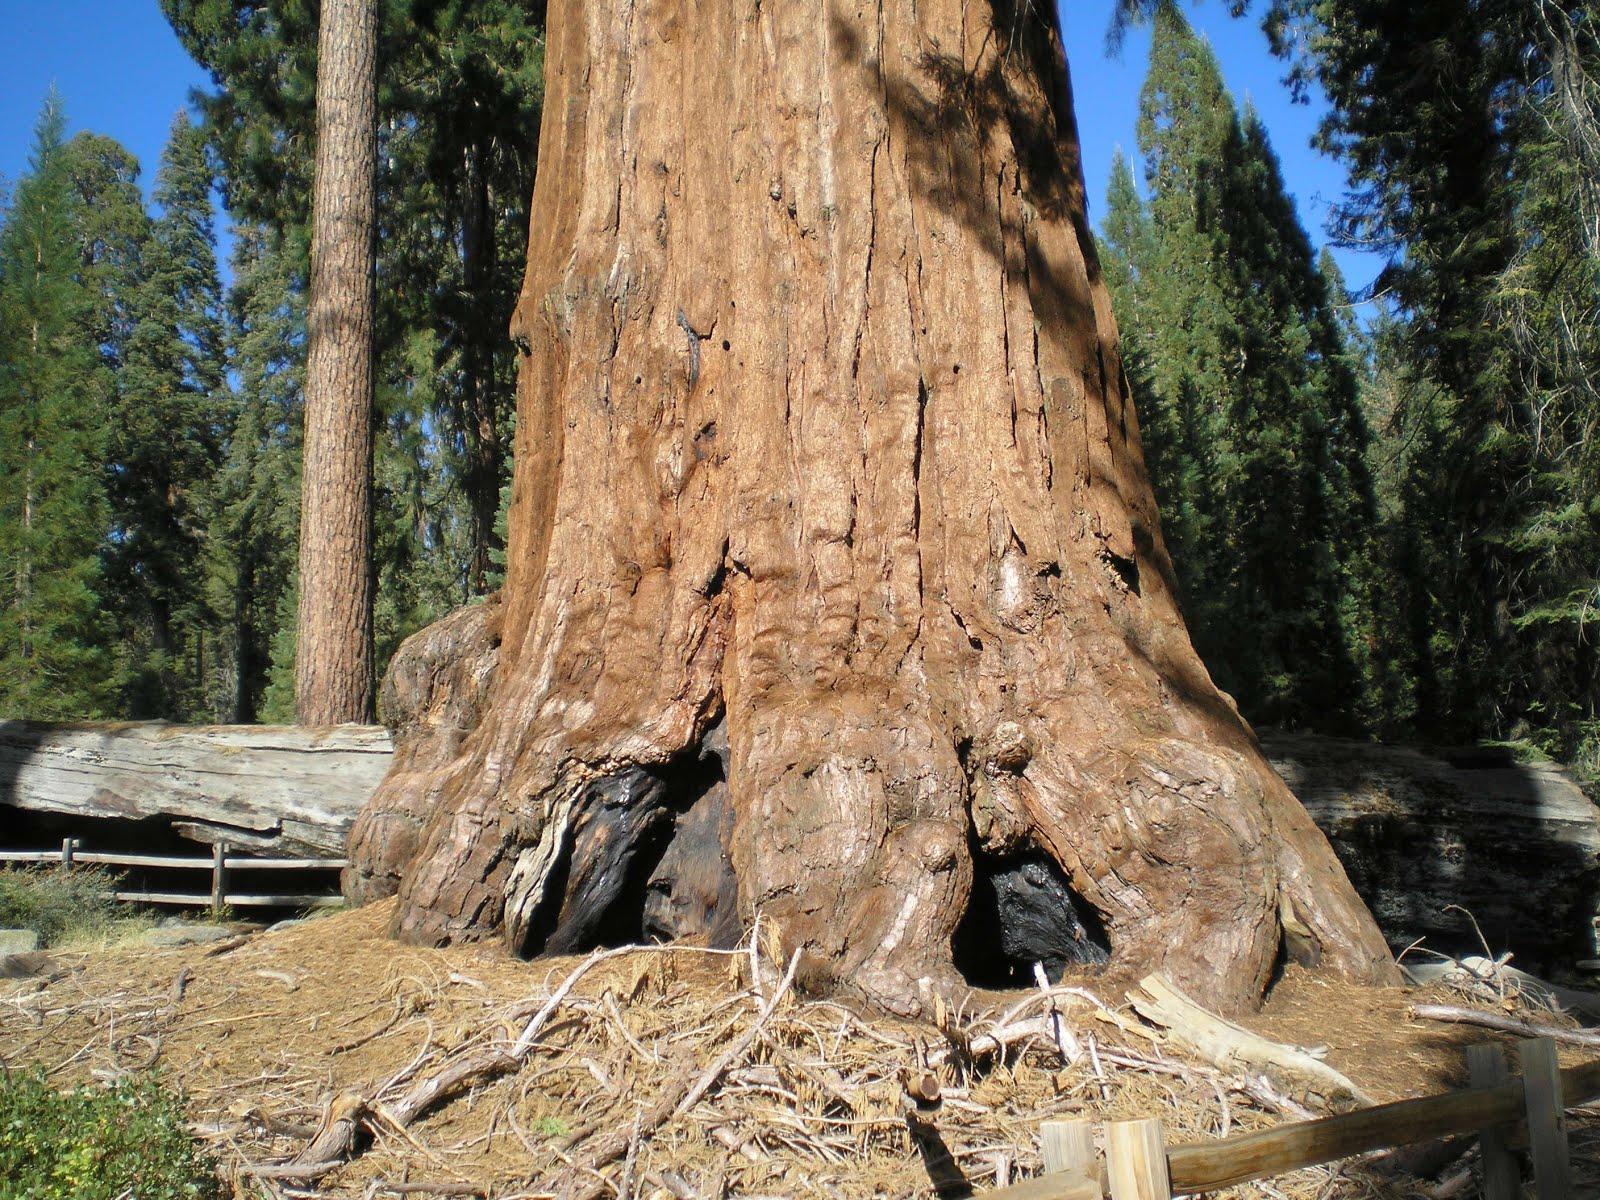 The Road Genealogist: Grant Grove Canyon National Park